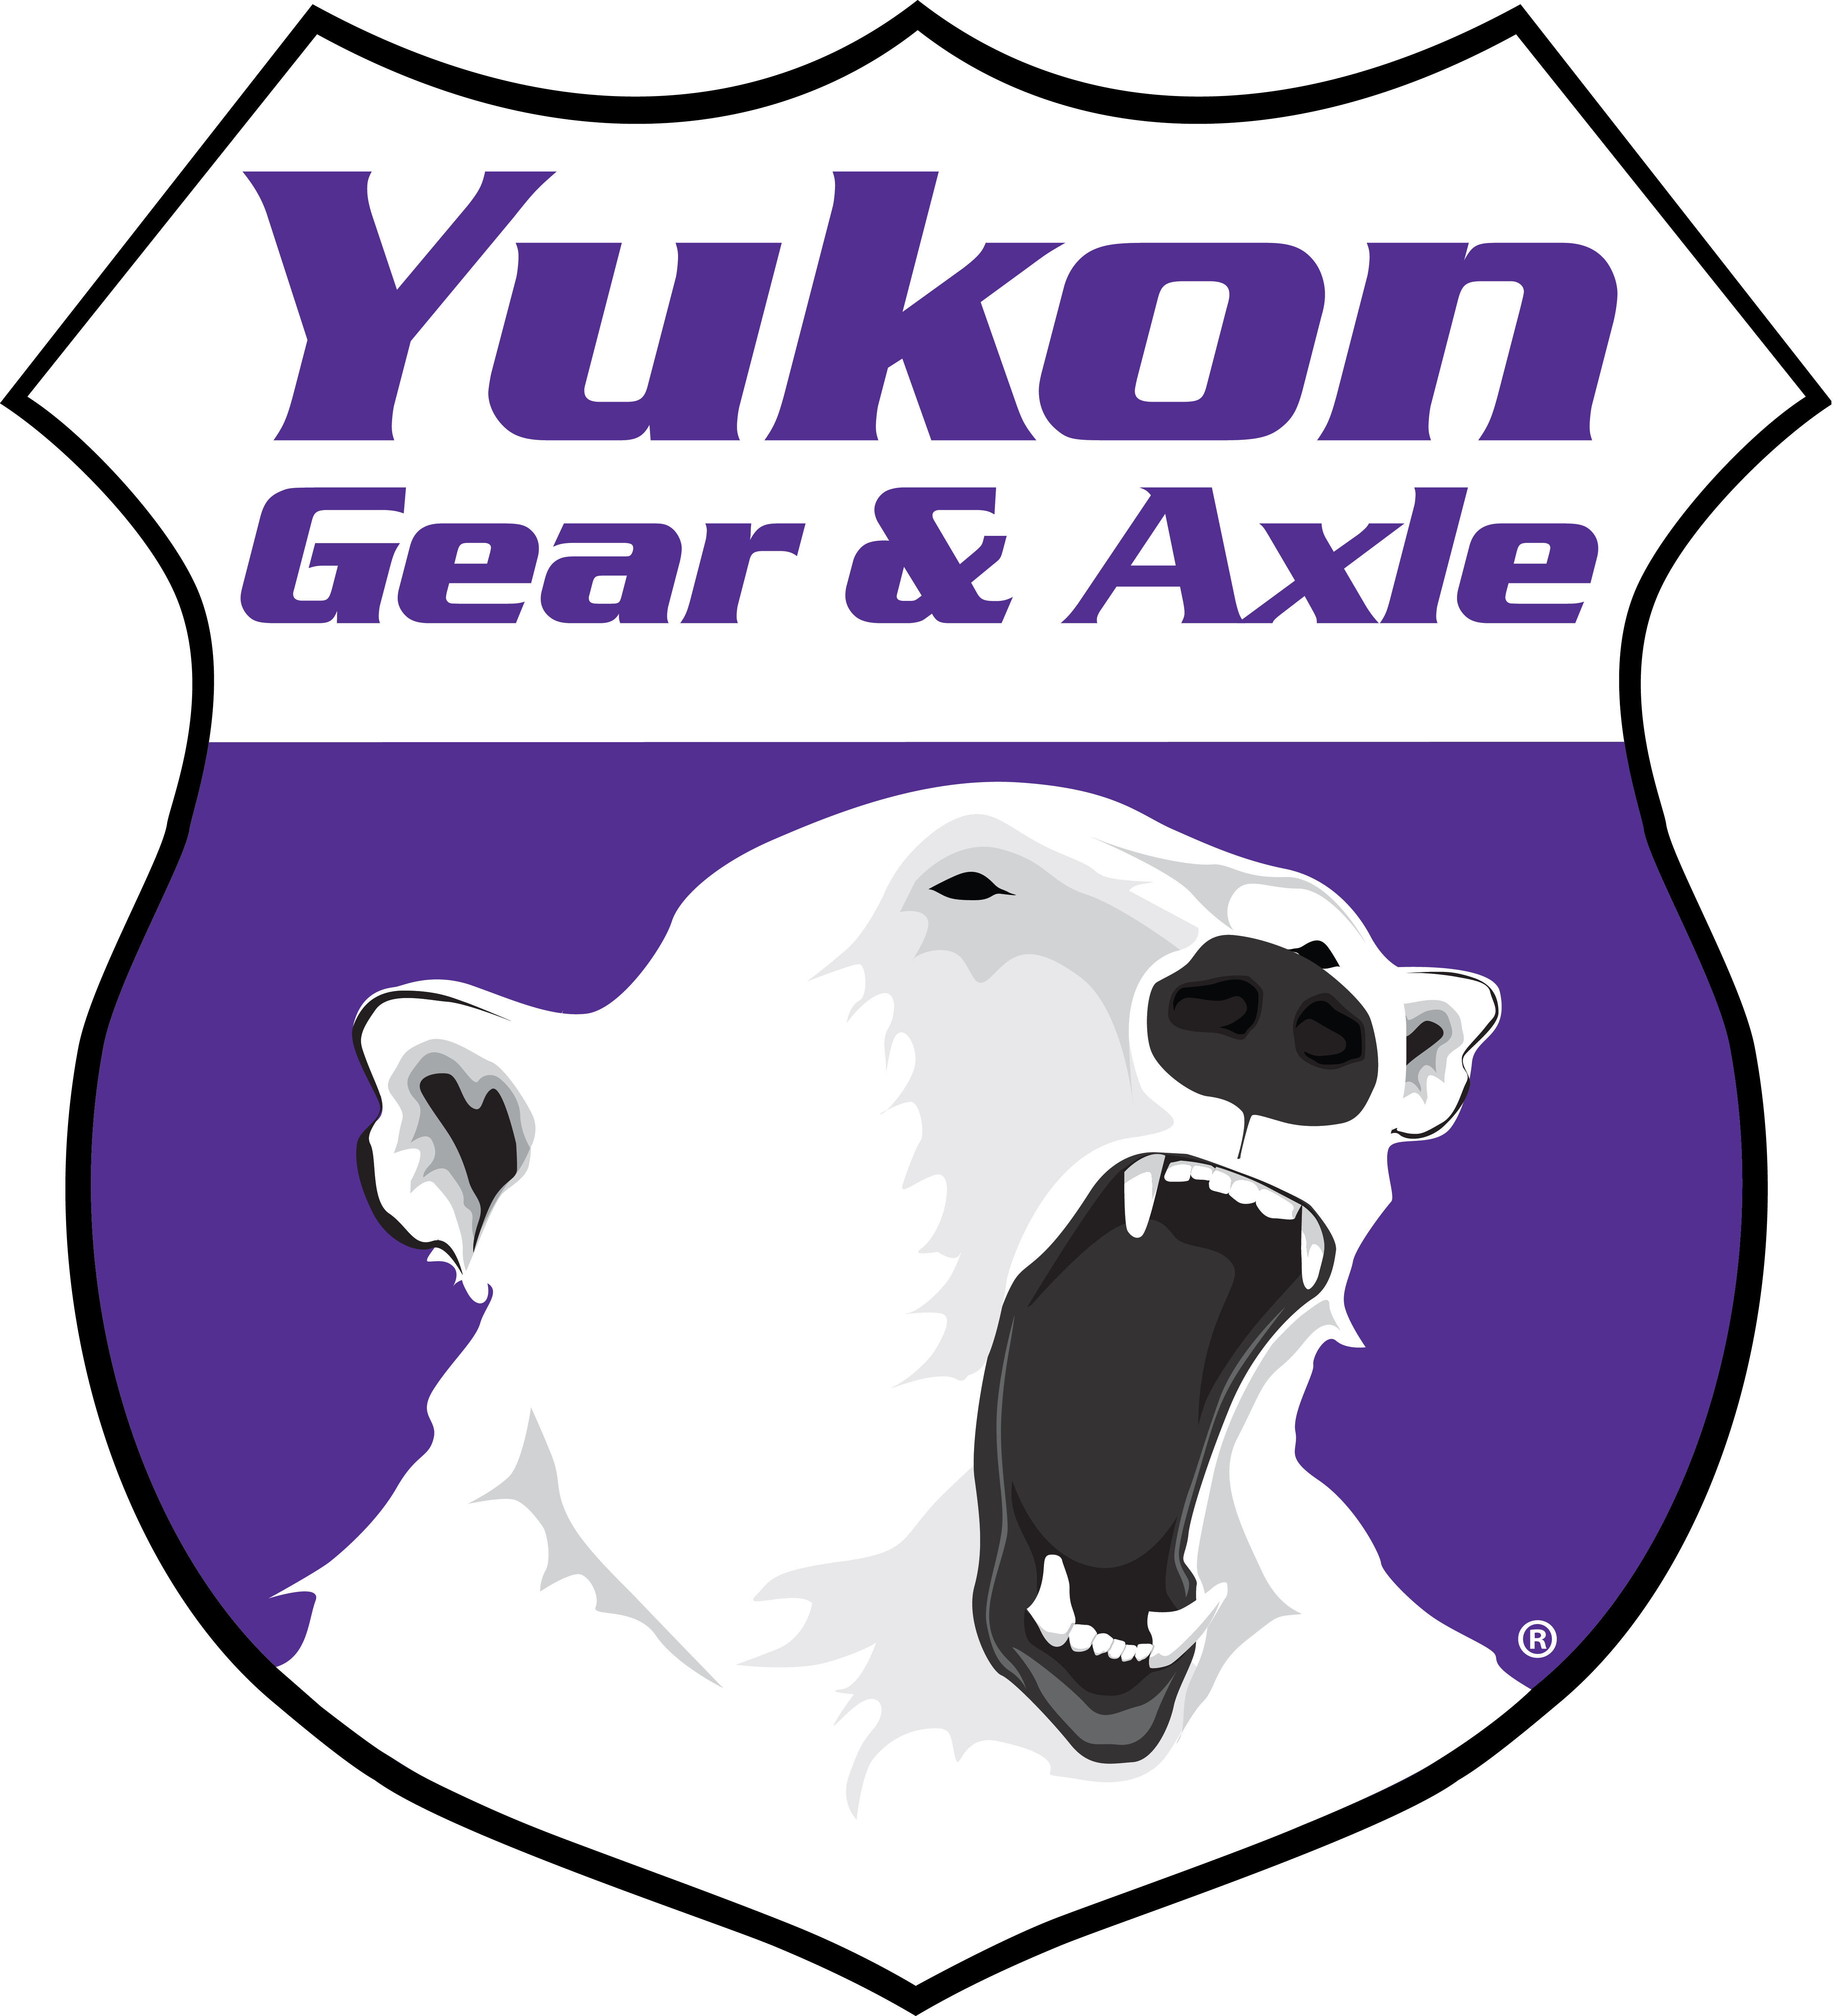 Yukon Pinion Install Kit for Toyota T100 & Tacoma without locking differential